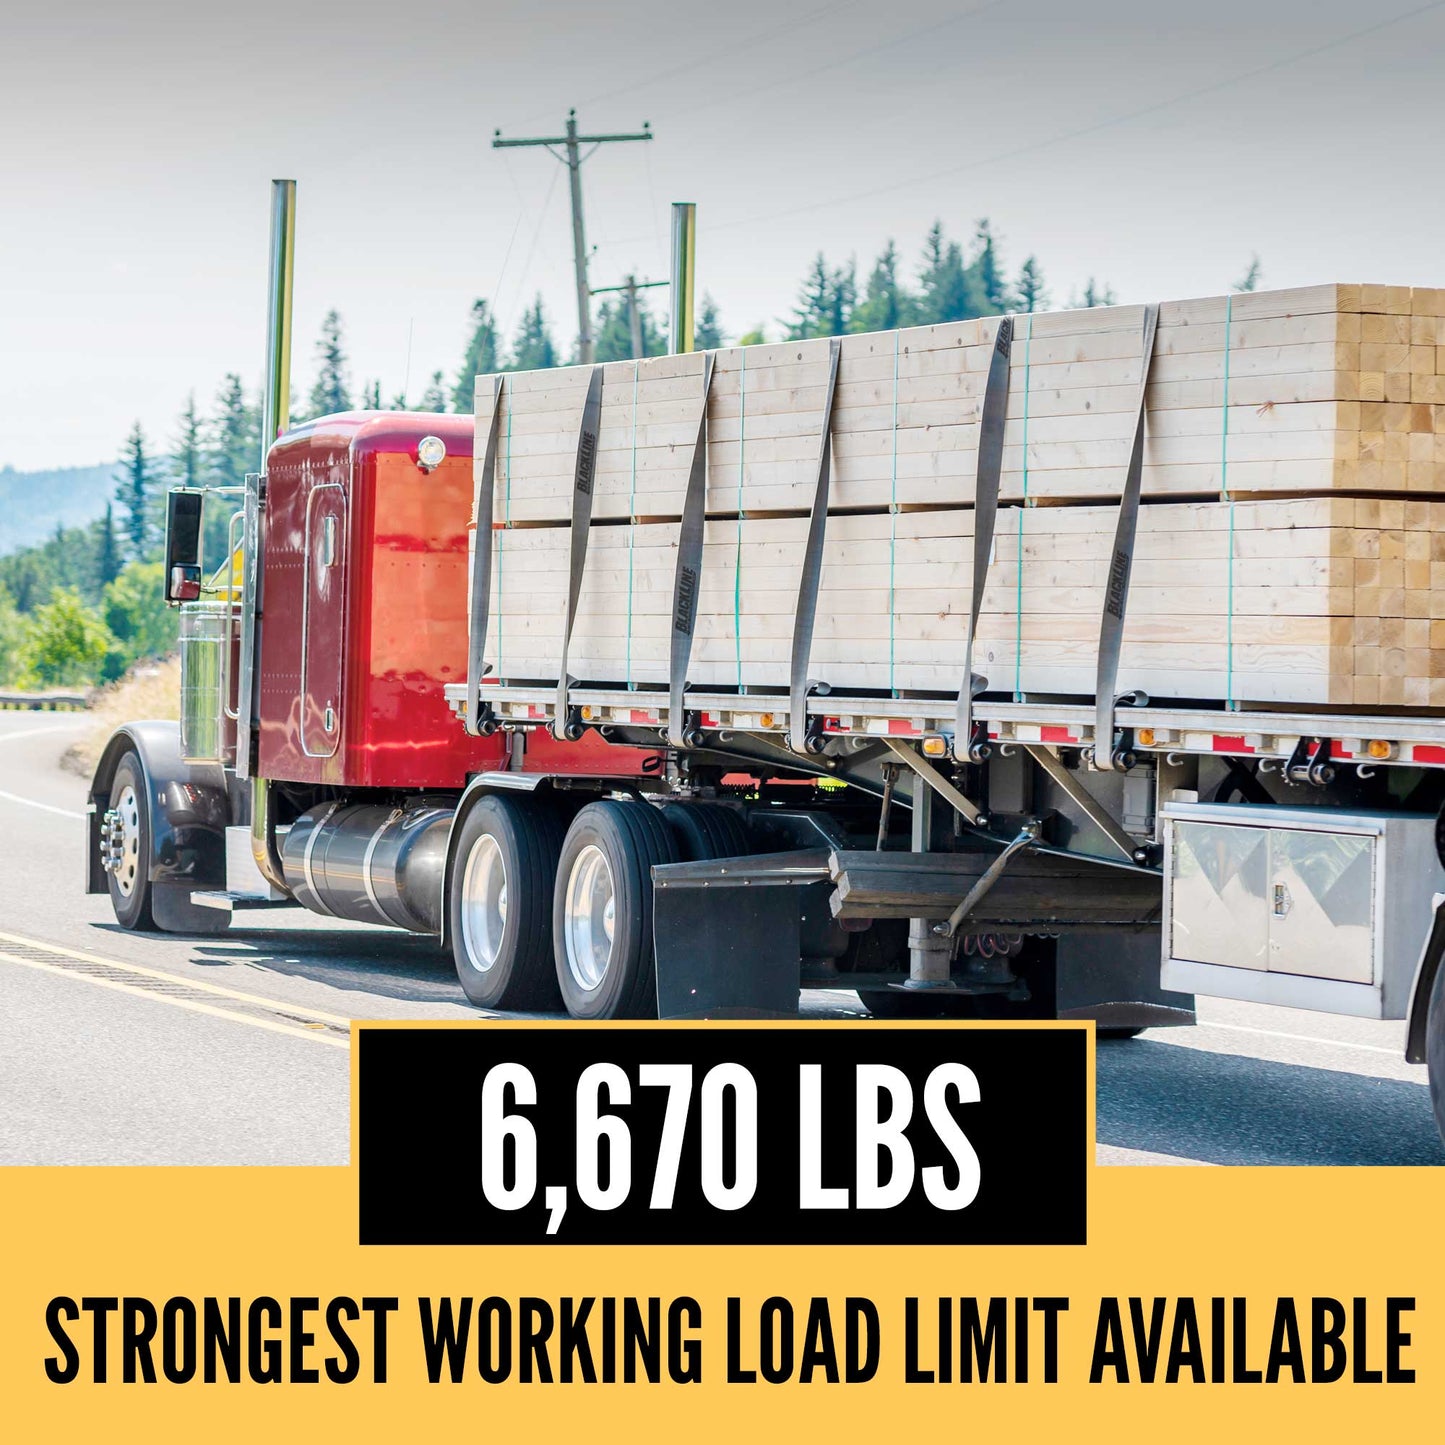 27' BlackLine strongest WLL in the industry at 6,670 lbs